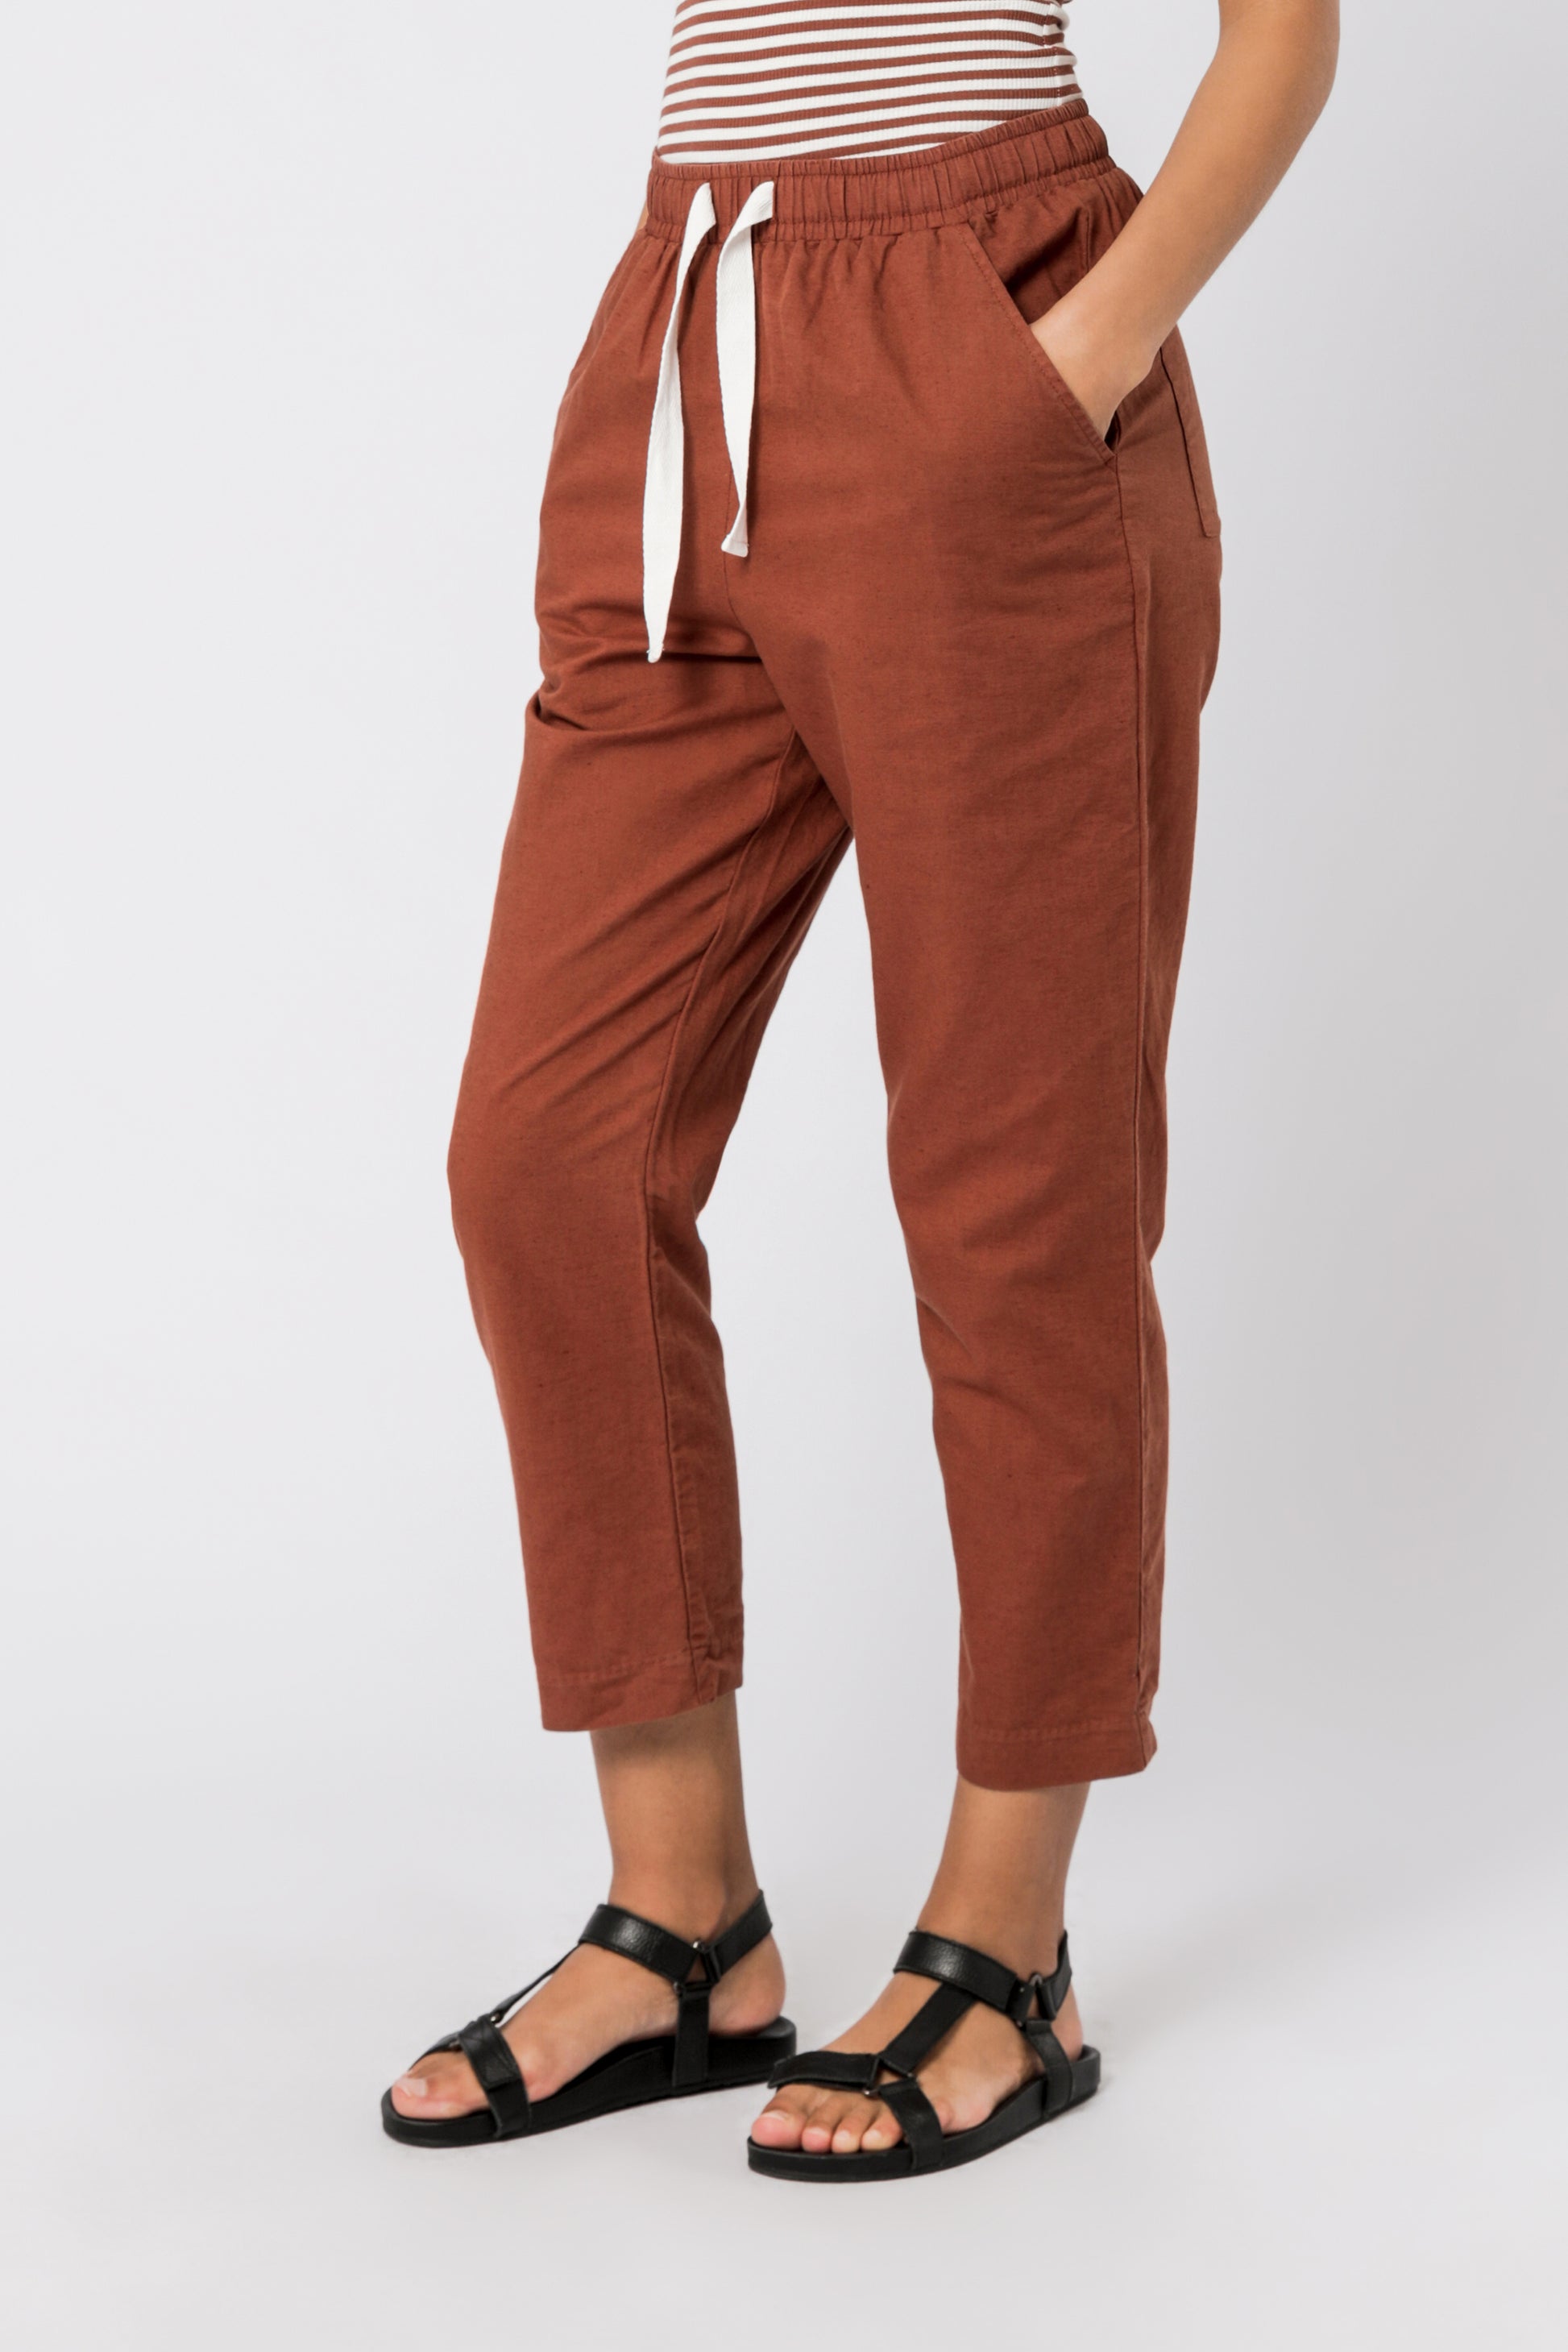 Nude Lucy Nude Classic Pant Pecan Pants 